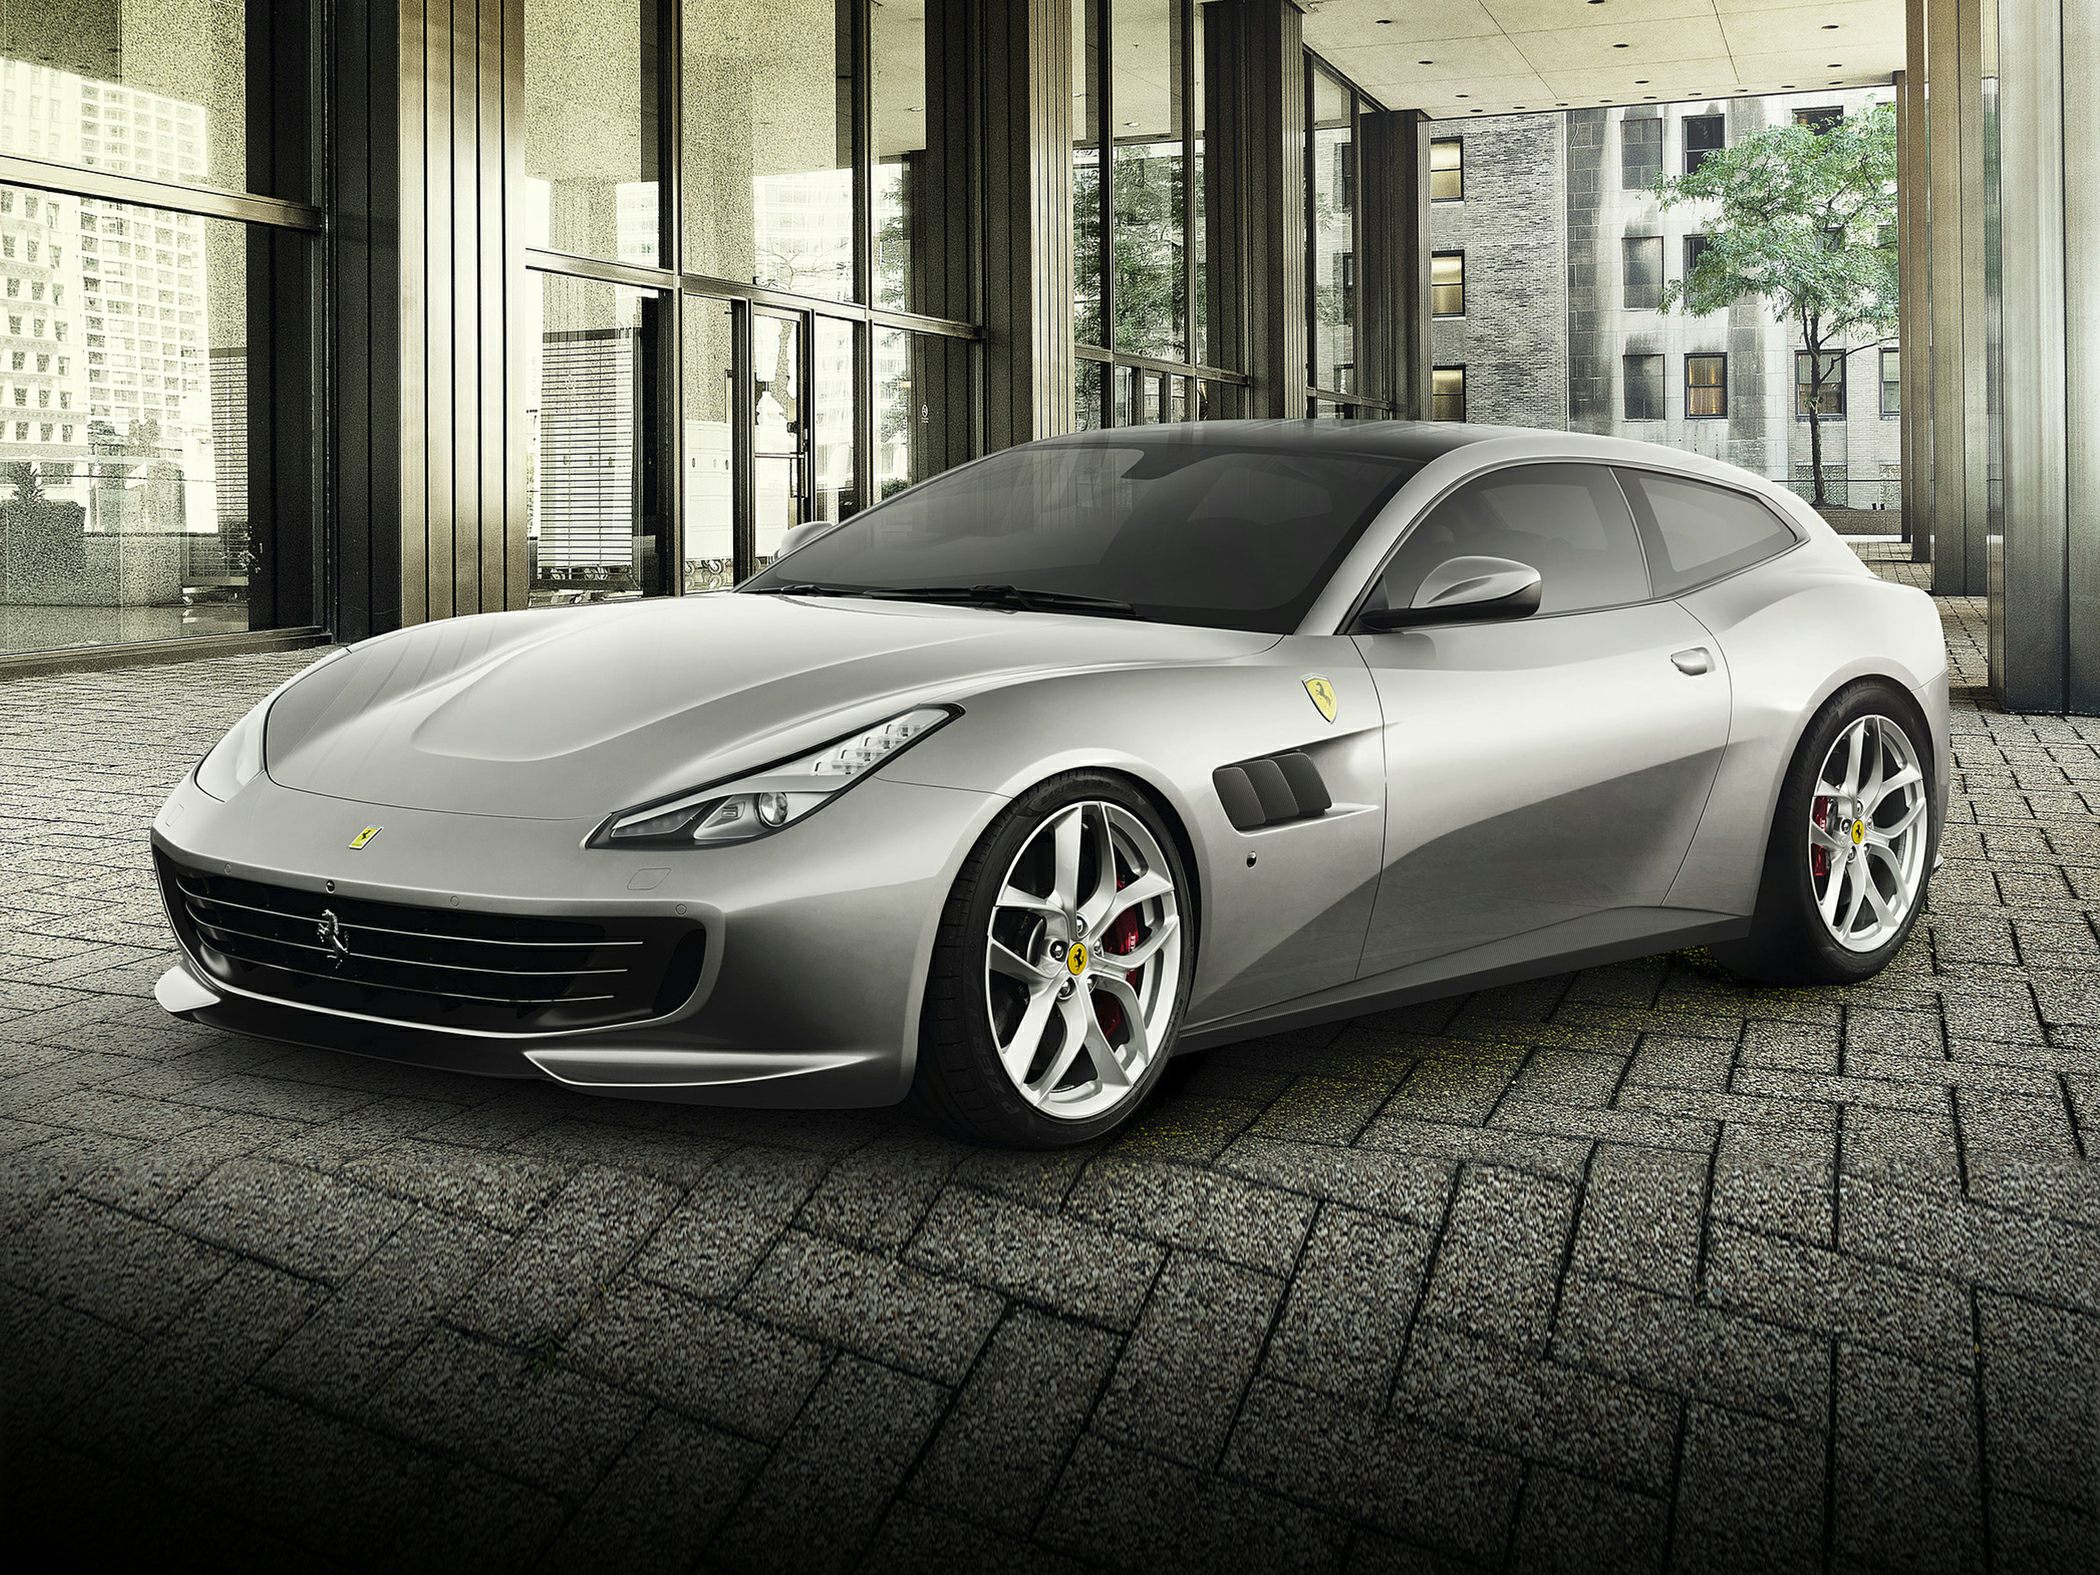 2020 Ferrari Gtc4lusso T 2dr Rear Wheel Drive Wagon Specs And Prices